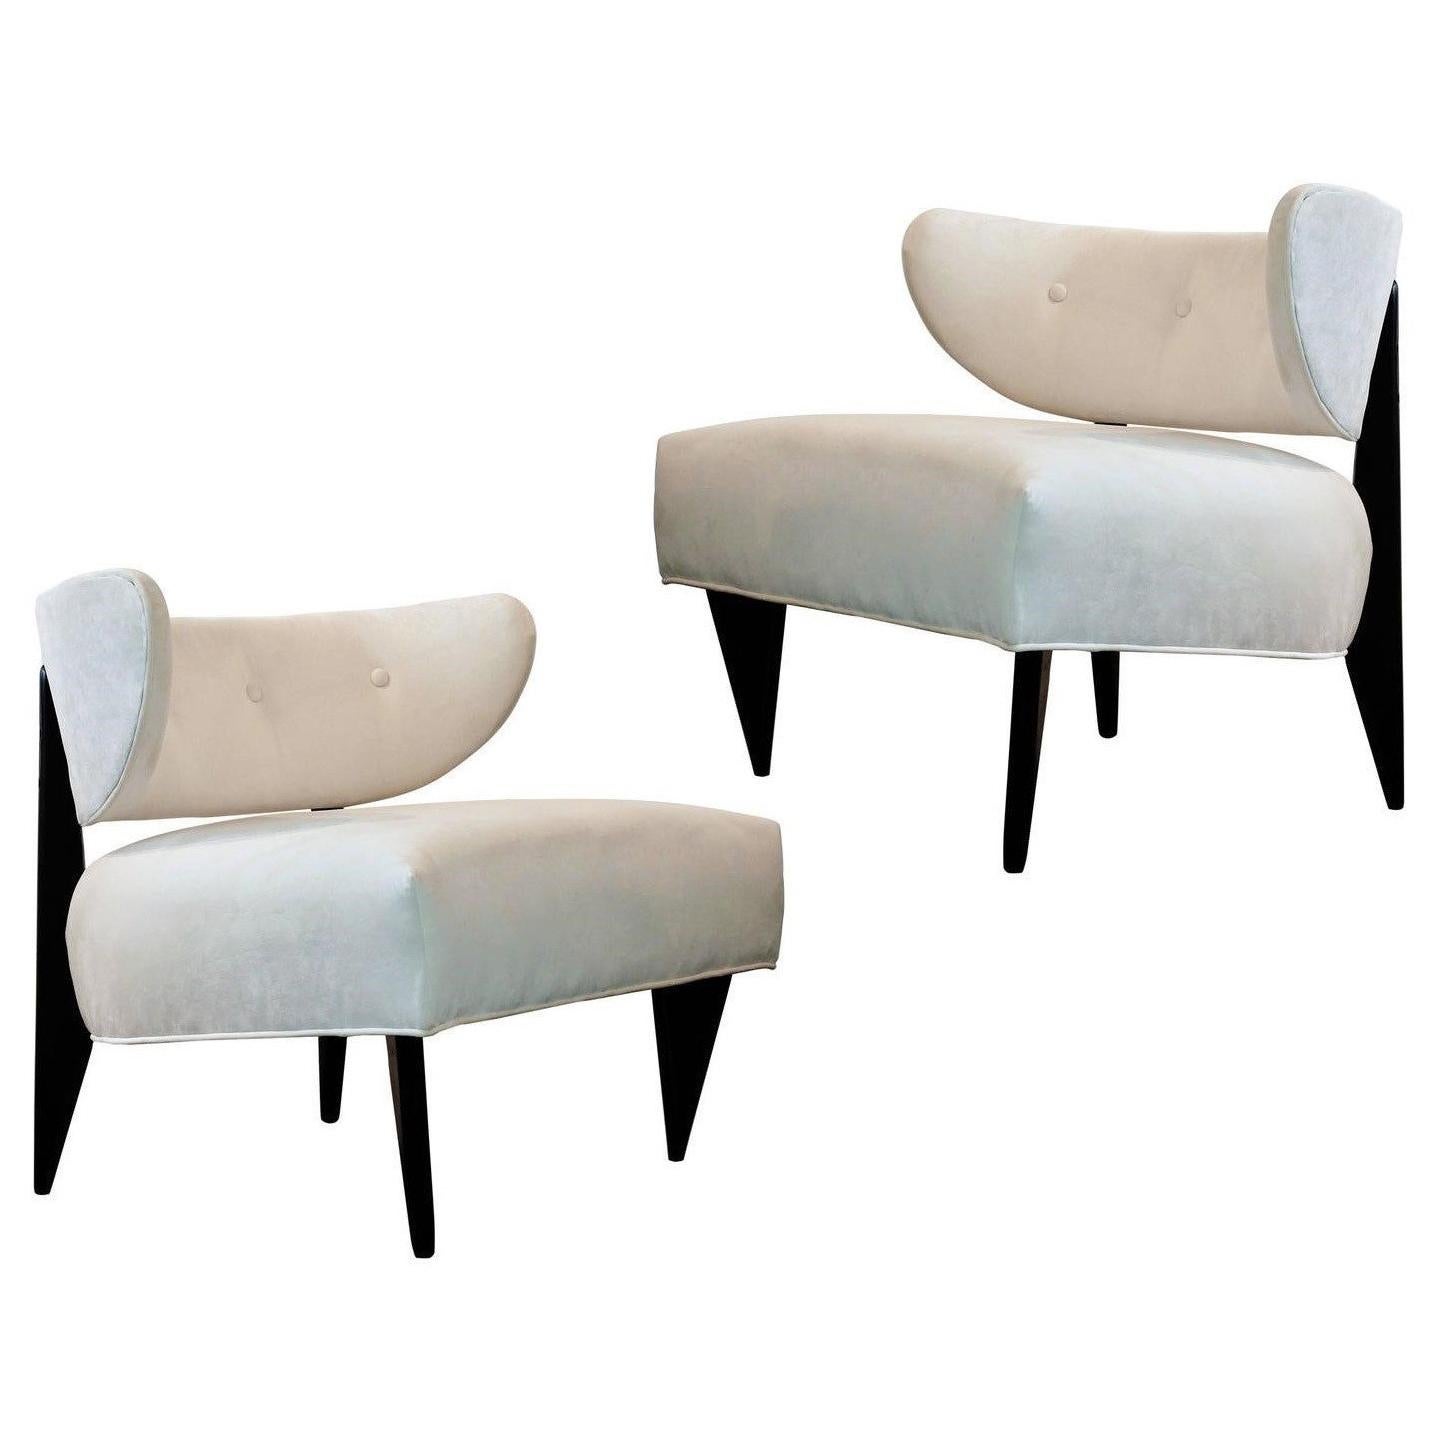 Pair of 1950's Sculptural Art Deco Lounge Chairs